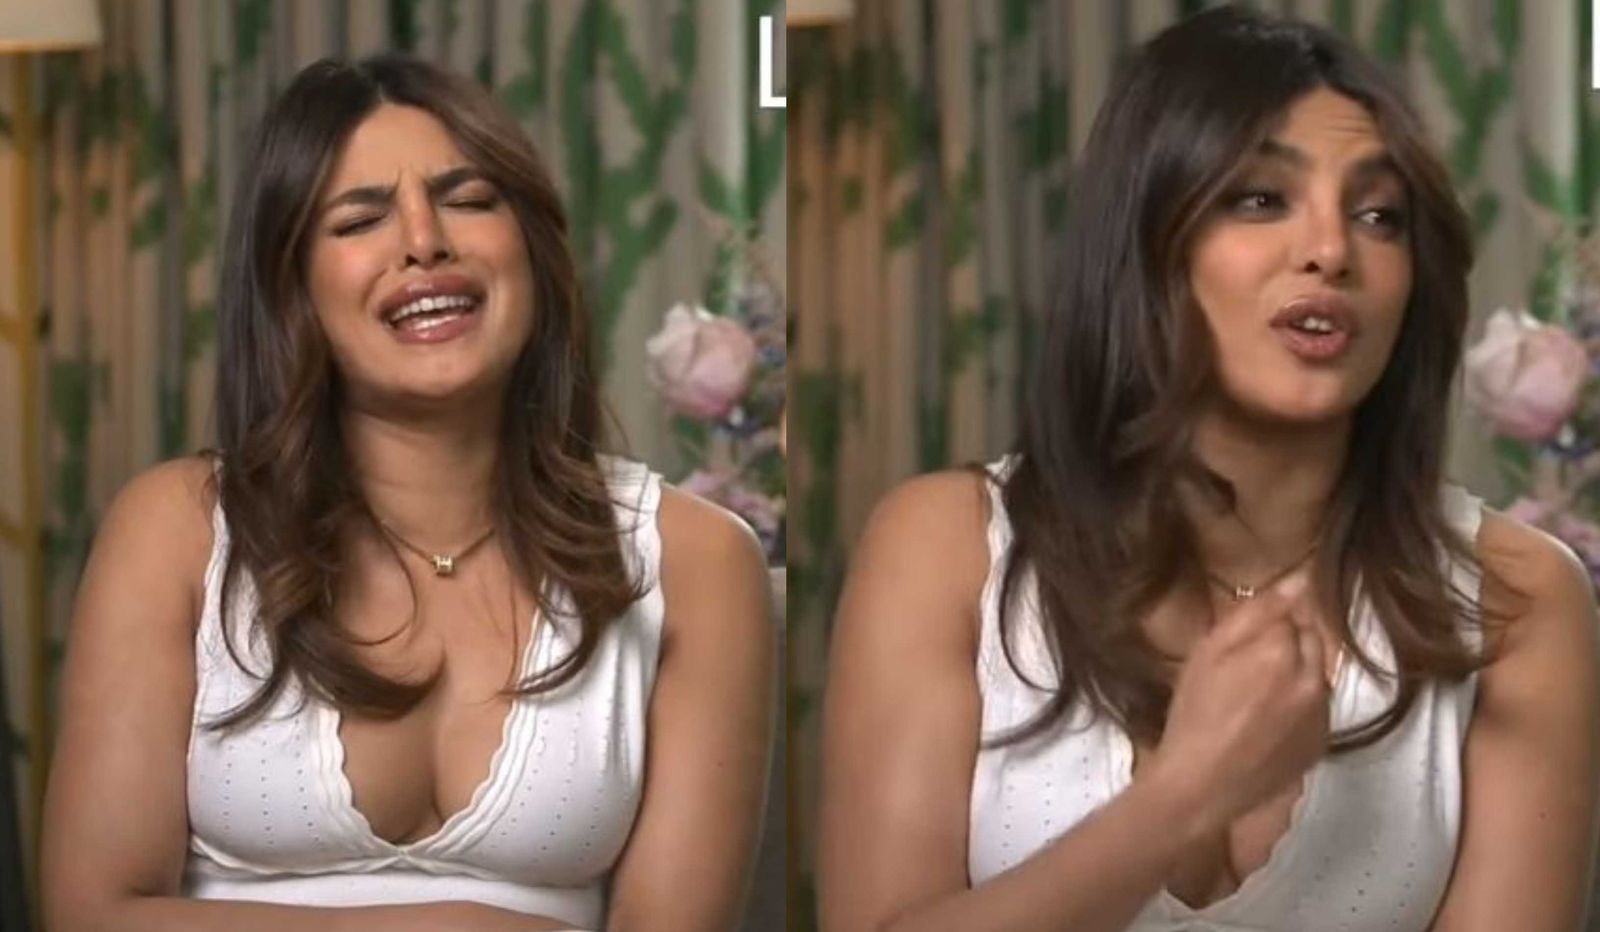 ‘I farted in public once’: Priyanka Chopra Jonas recalls embarrassing incident, fans call her relatable